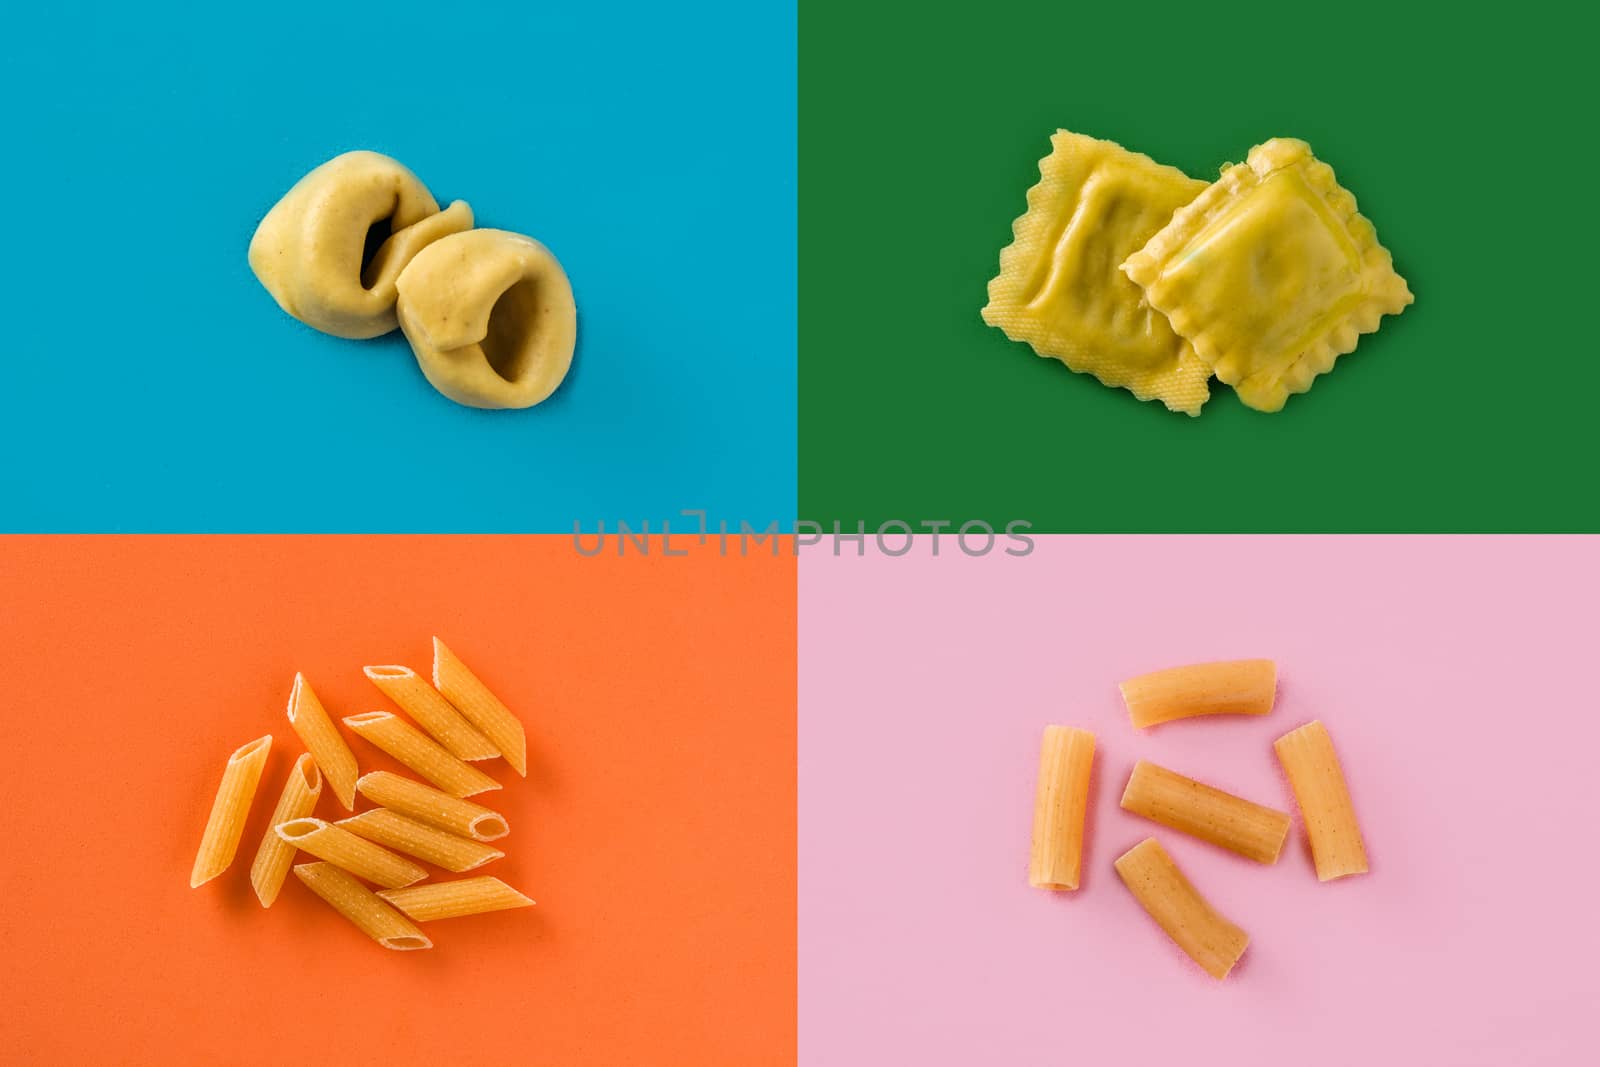 Collage of different types of pasta by chandlervid85